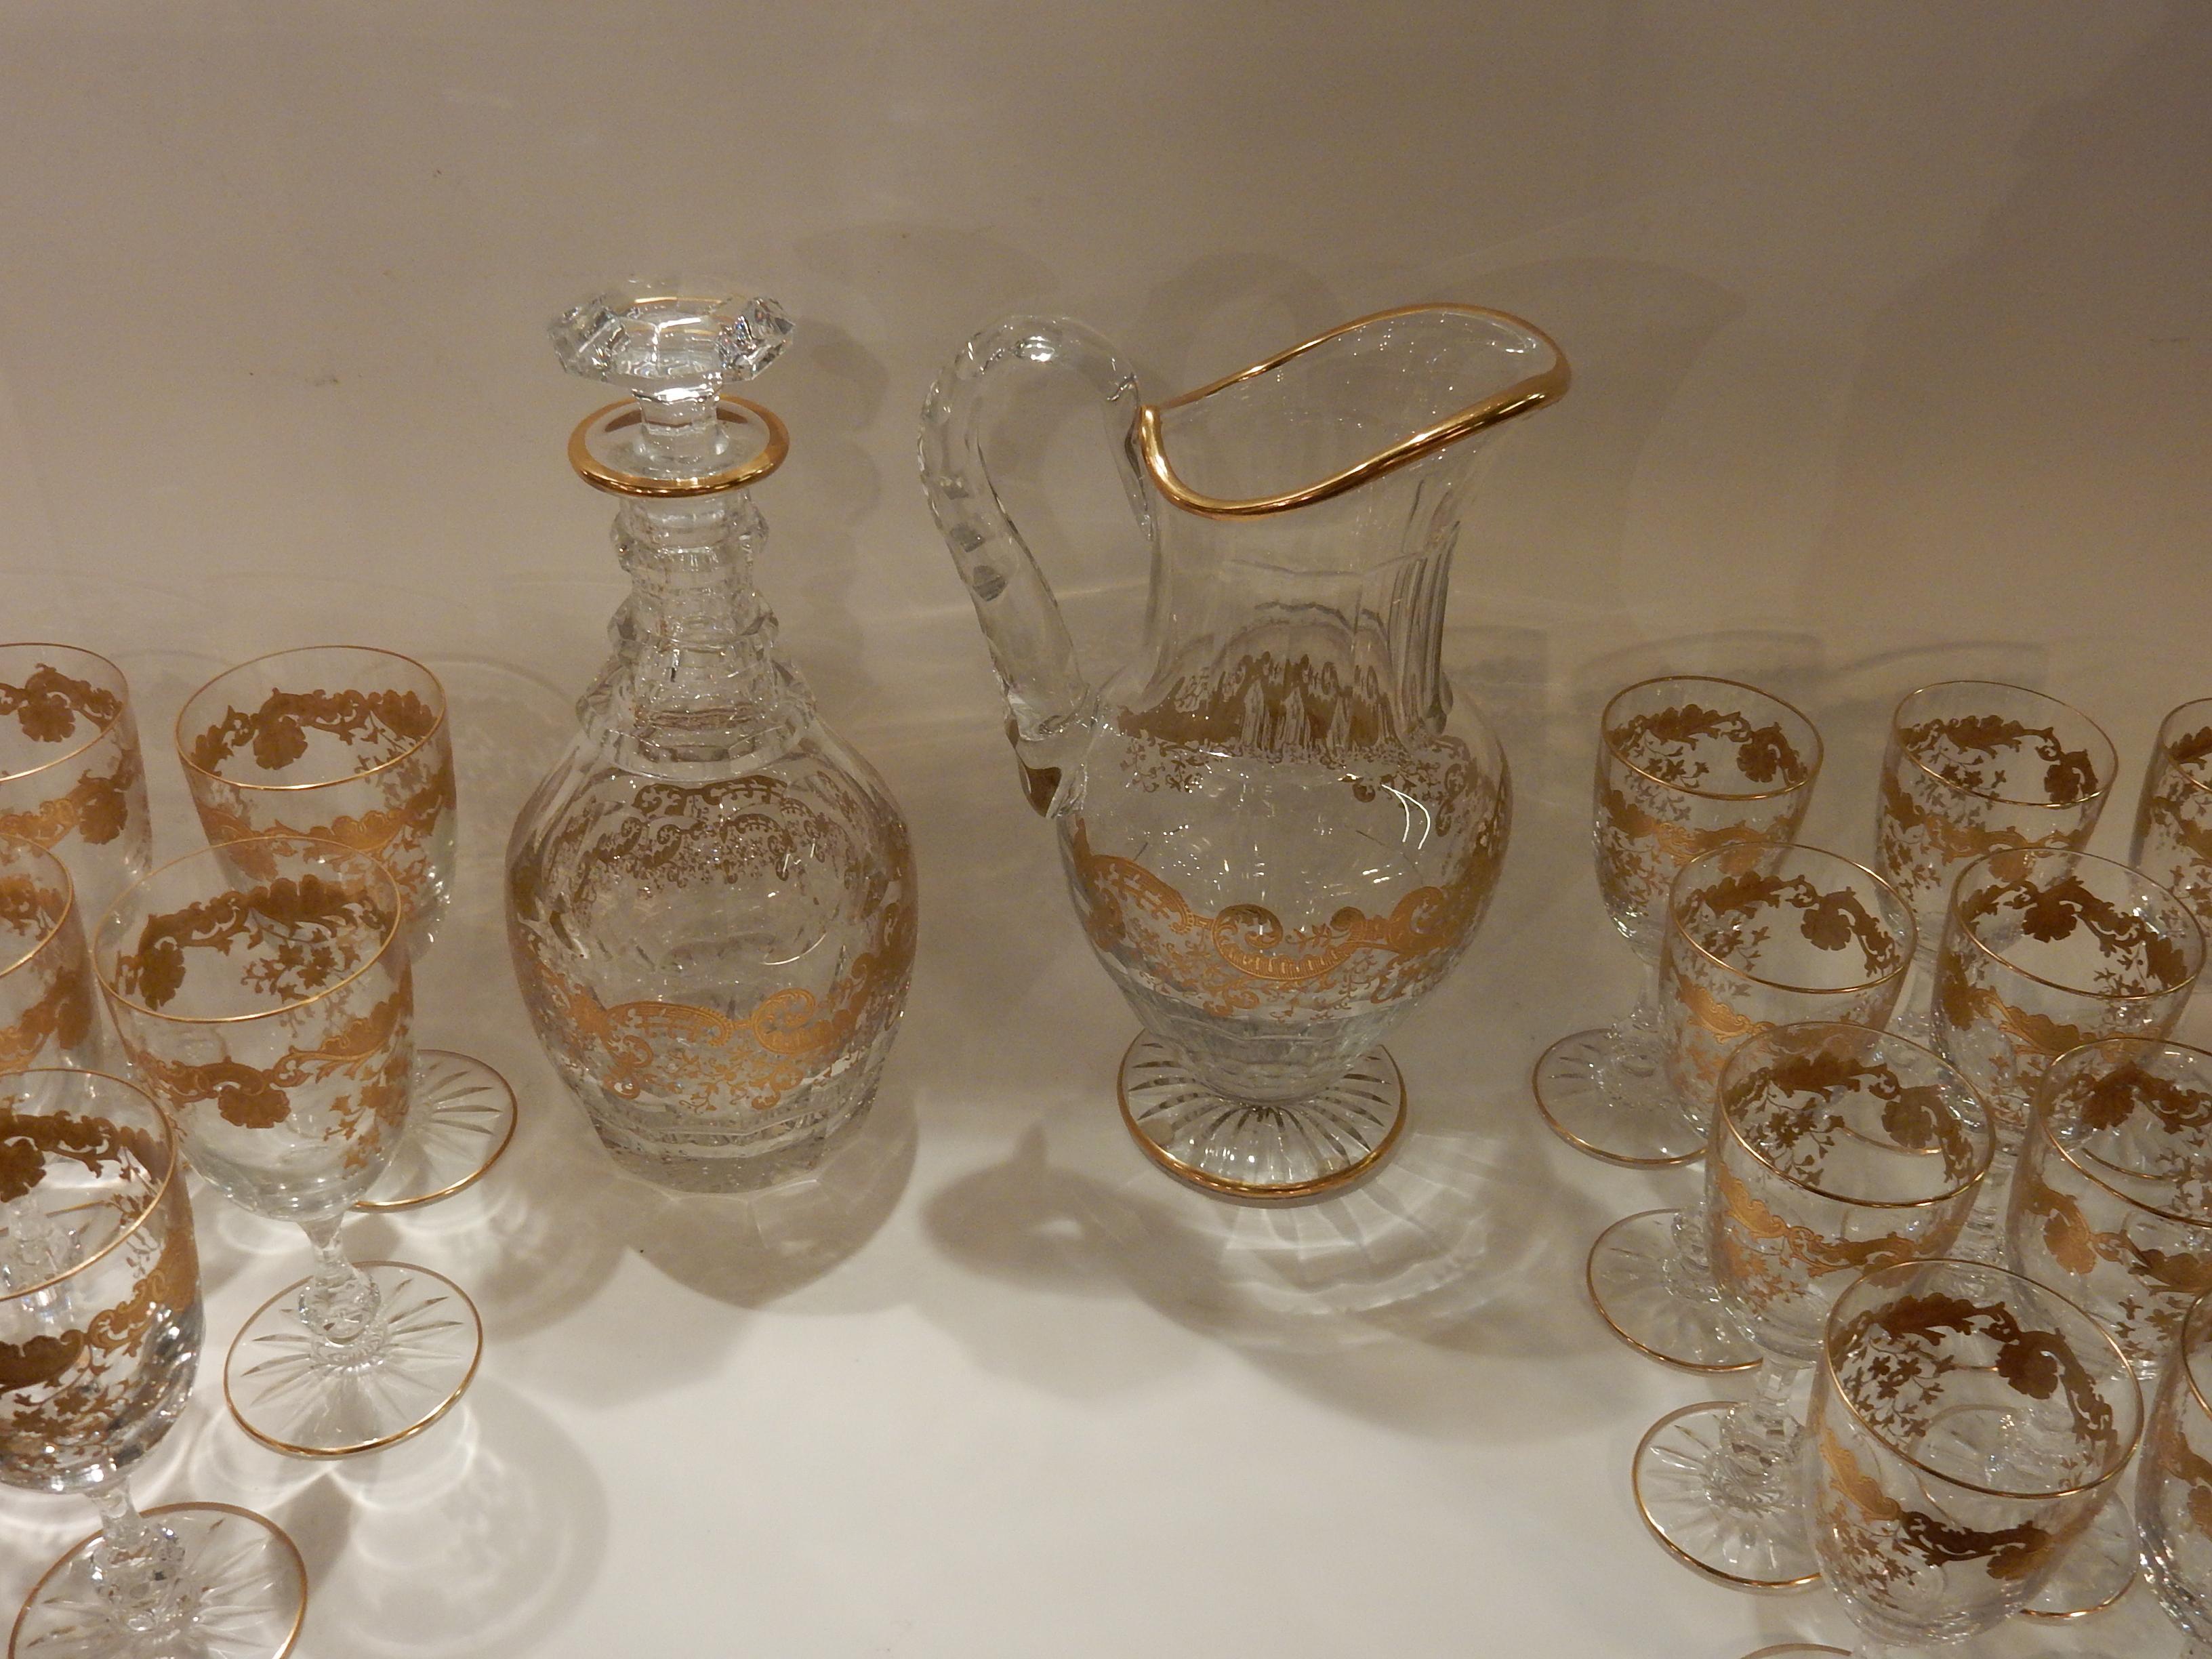 1950 Crystal Serveware From St Louis Trianon 22 Piéces Signed 3